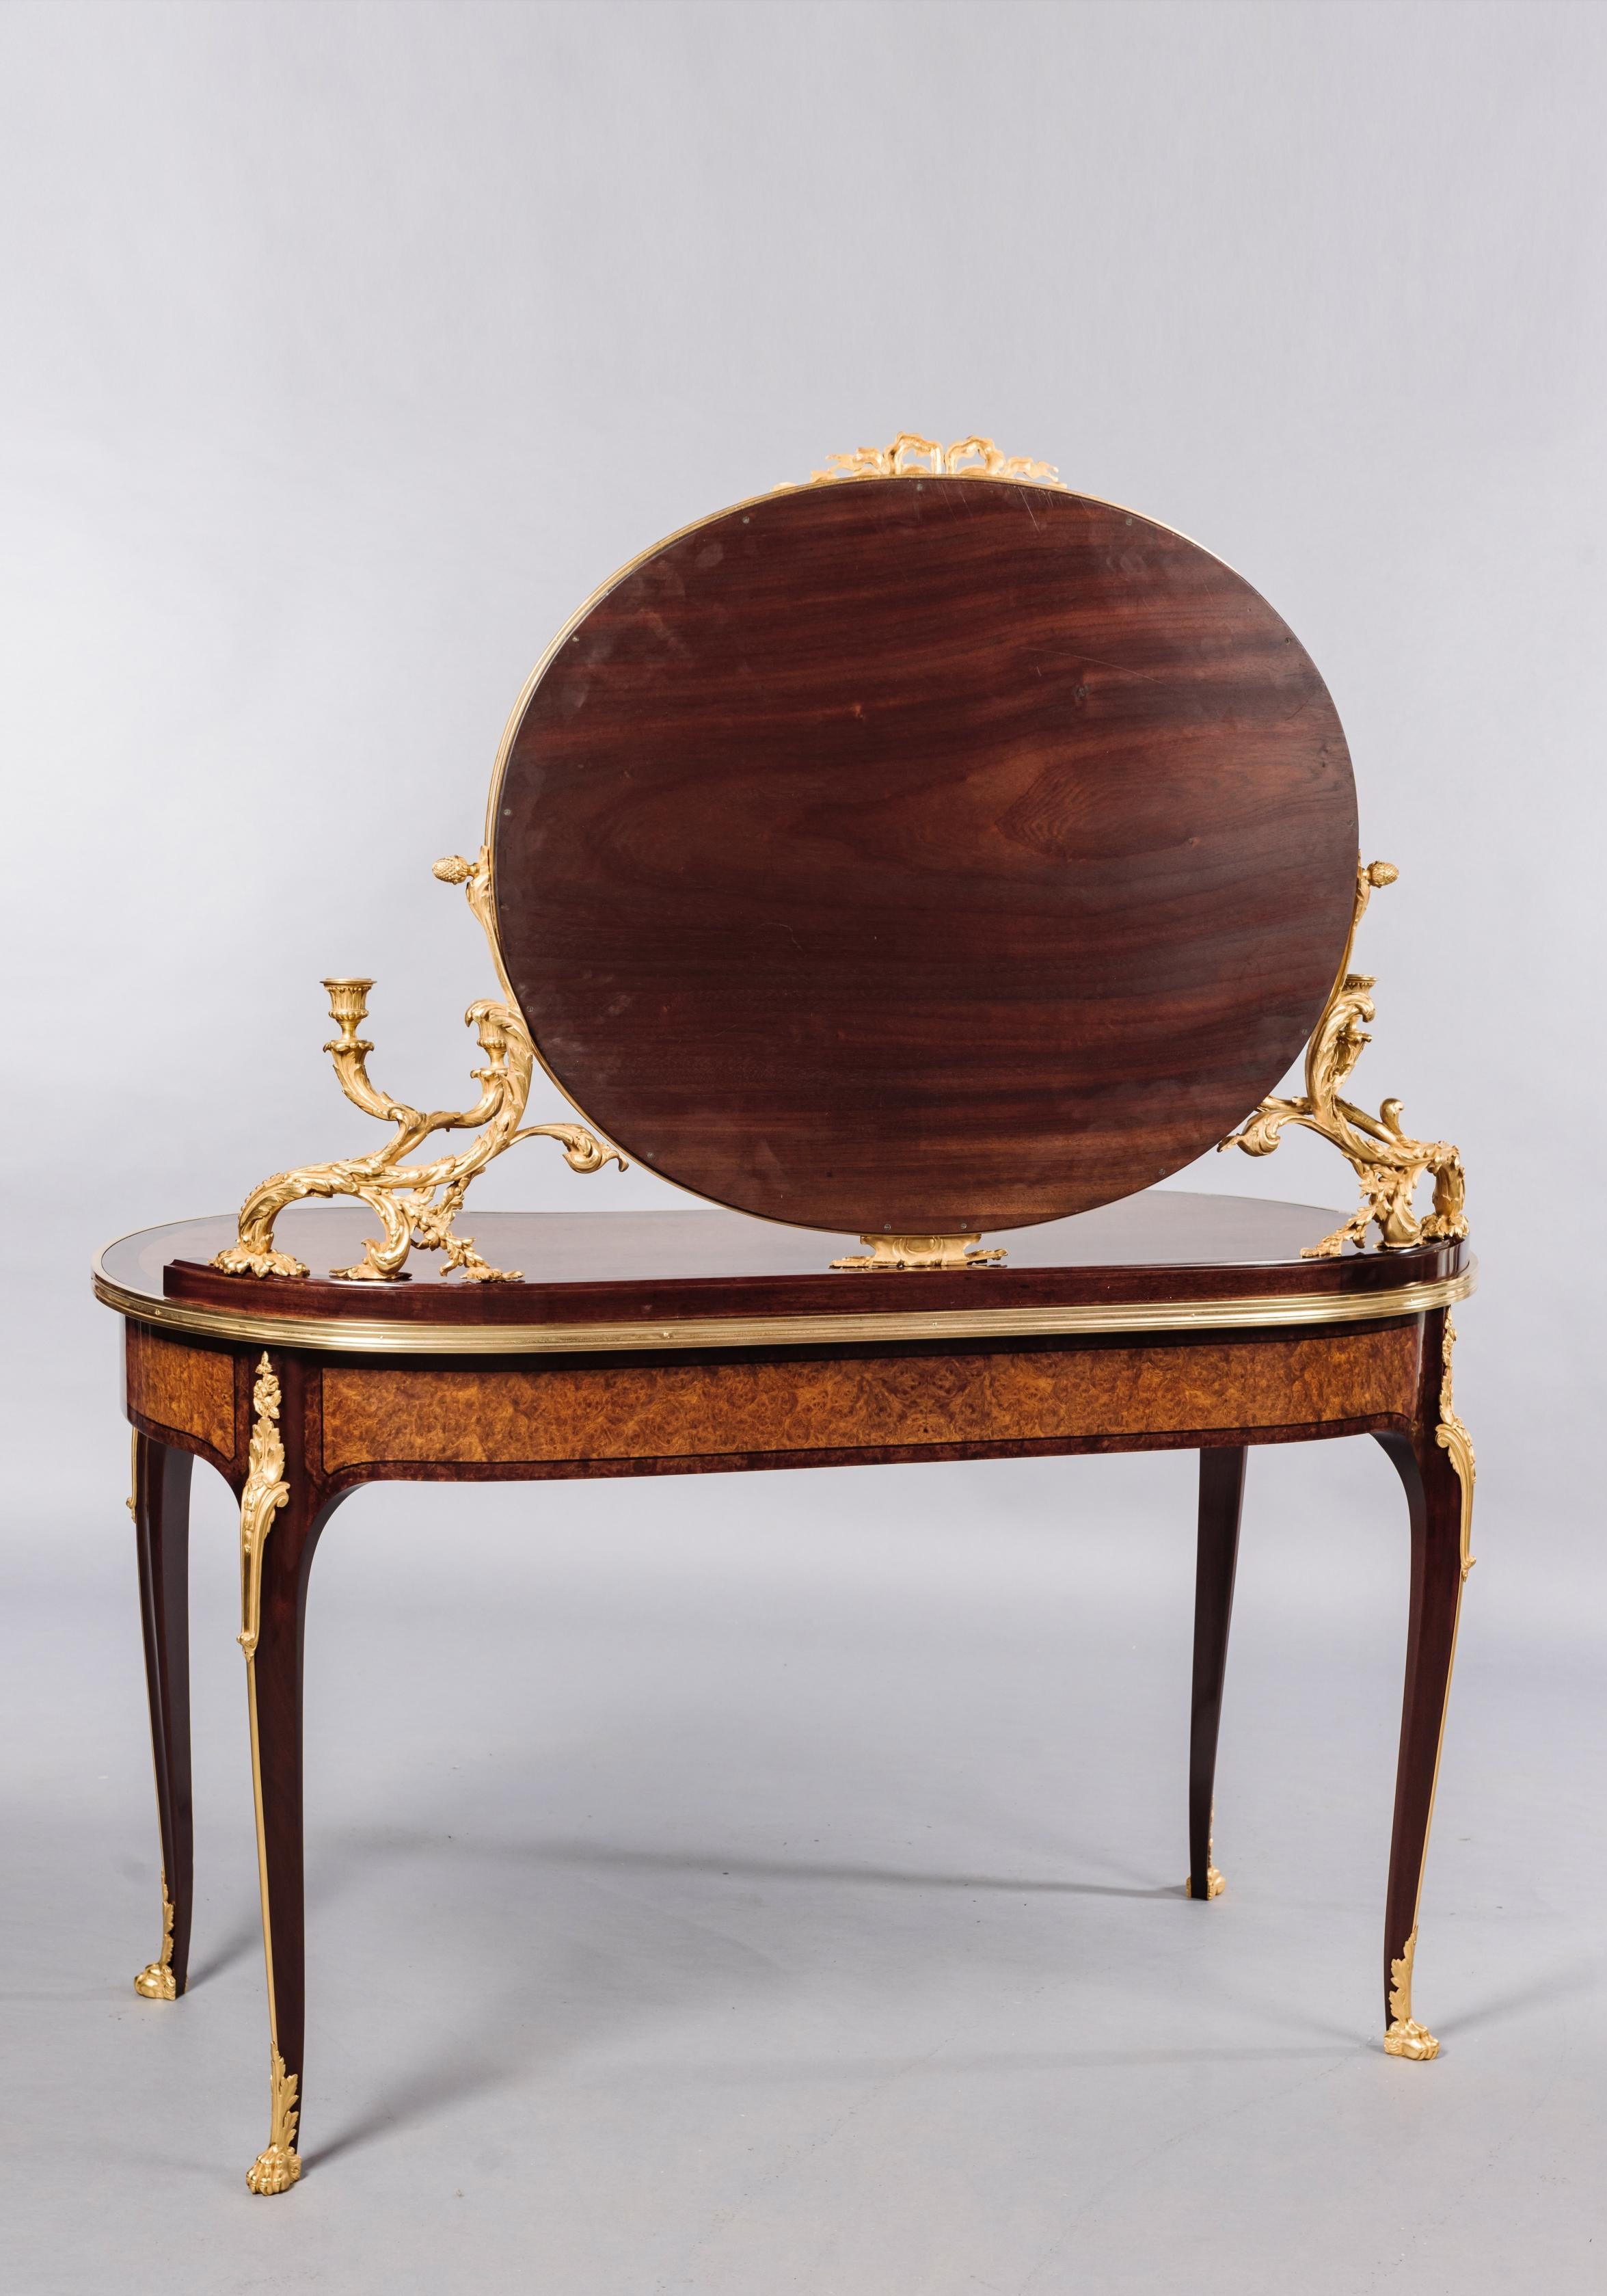 French Transitional Style Dressing Table Attributed to François Linke, circa 1900